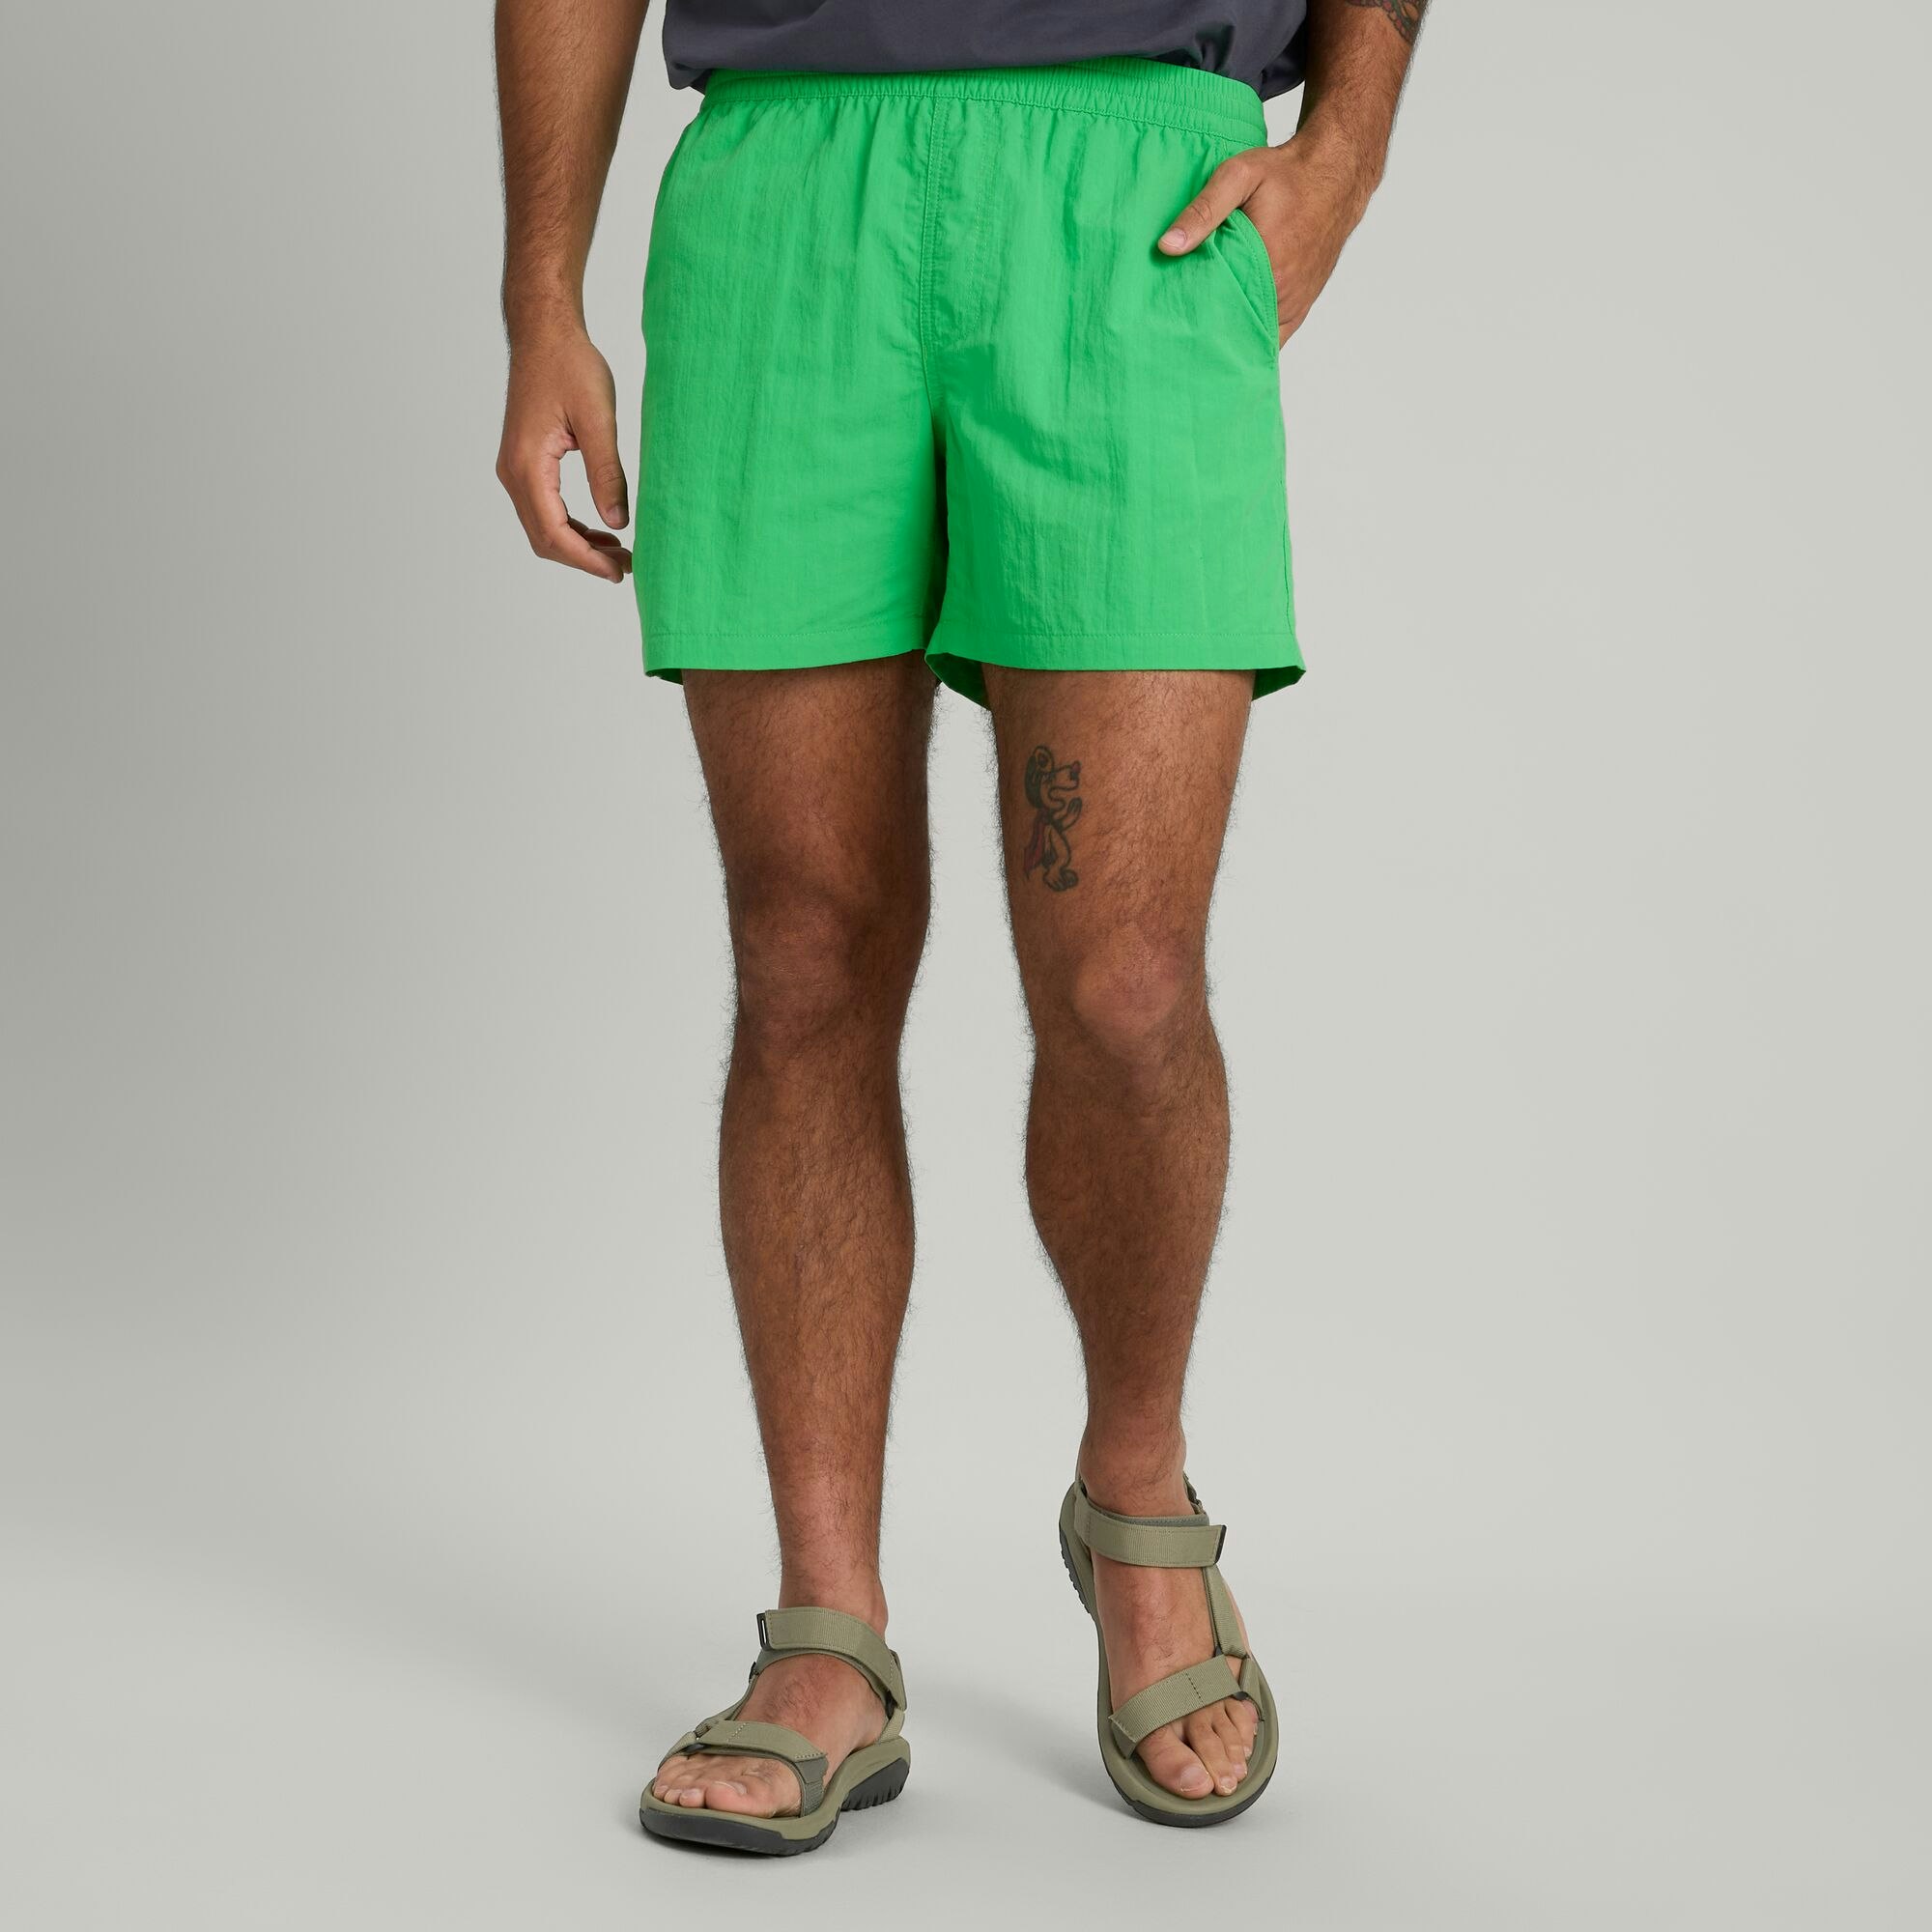 EVRY-Day Men's Five Inch Shorts